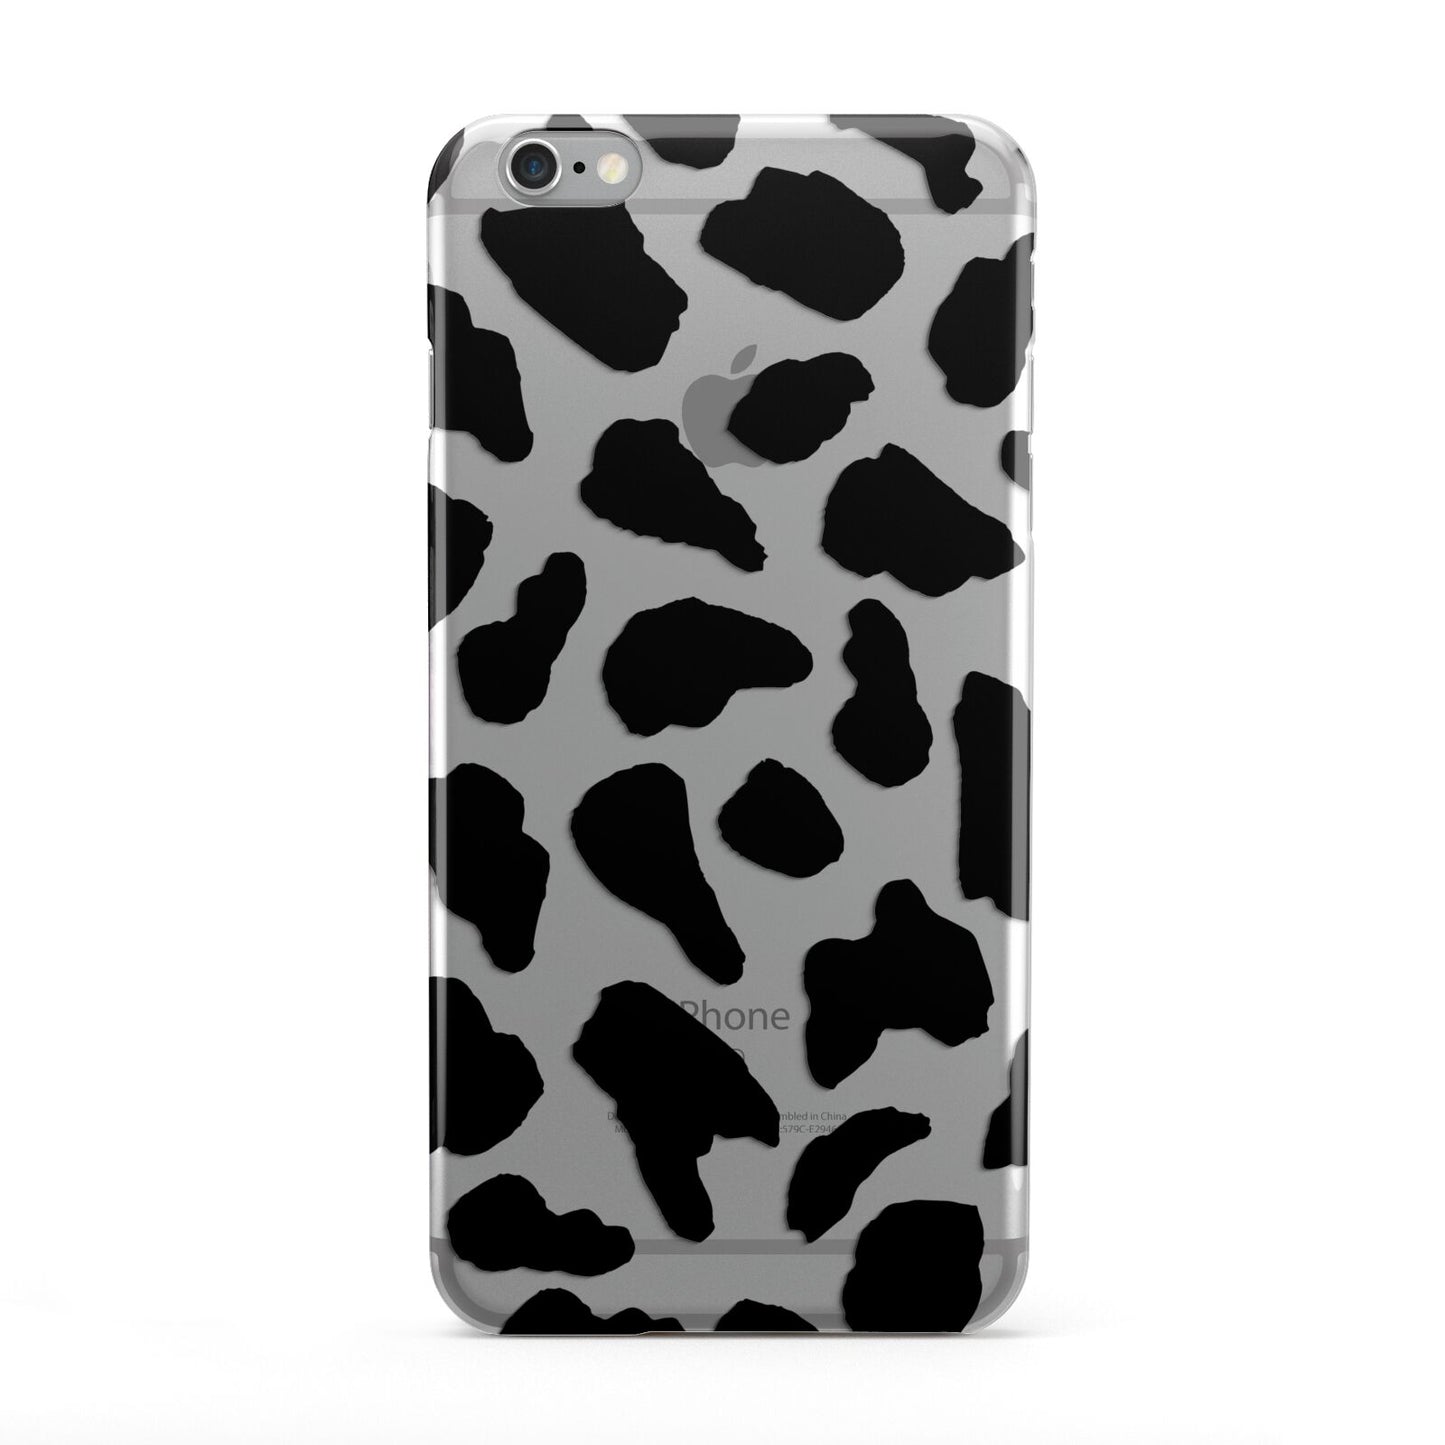 Black and White Cow Print Apple iPhone 6 Plus Case